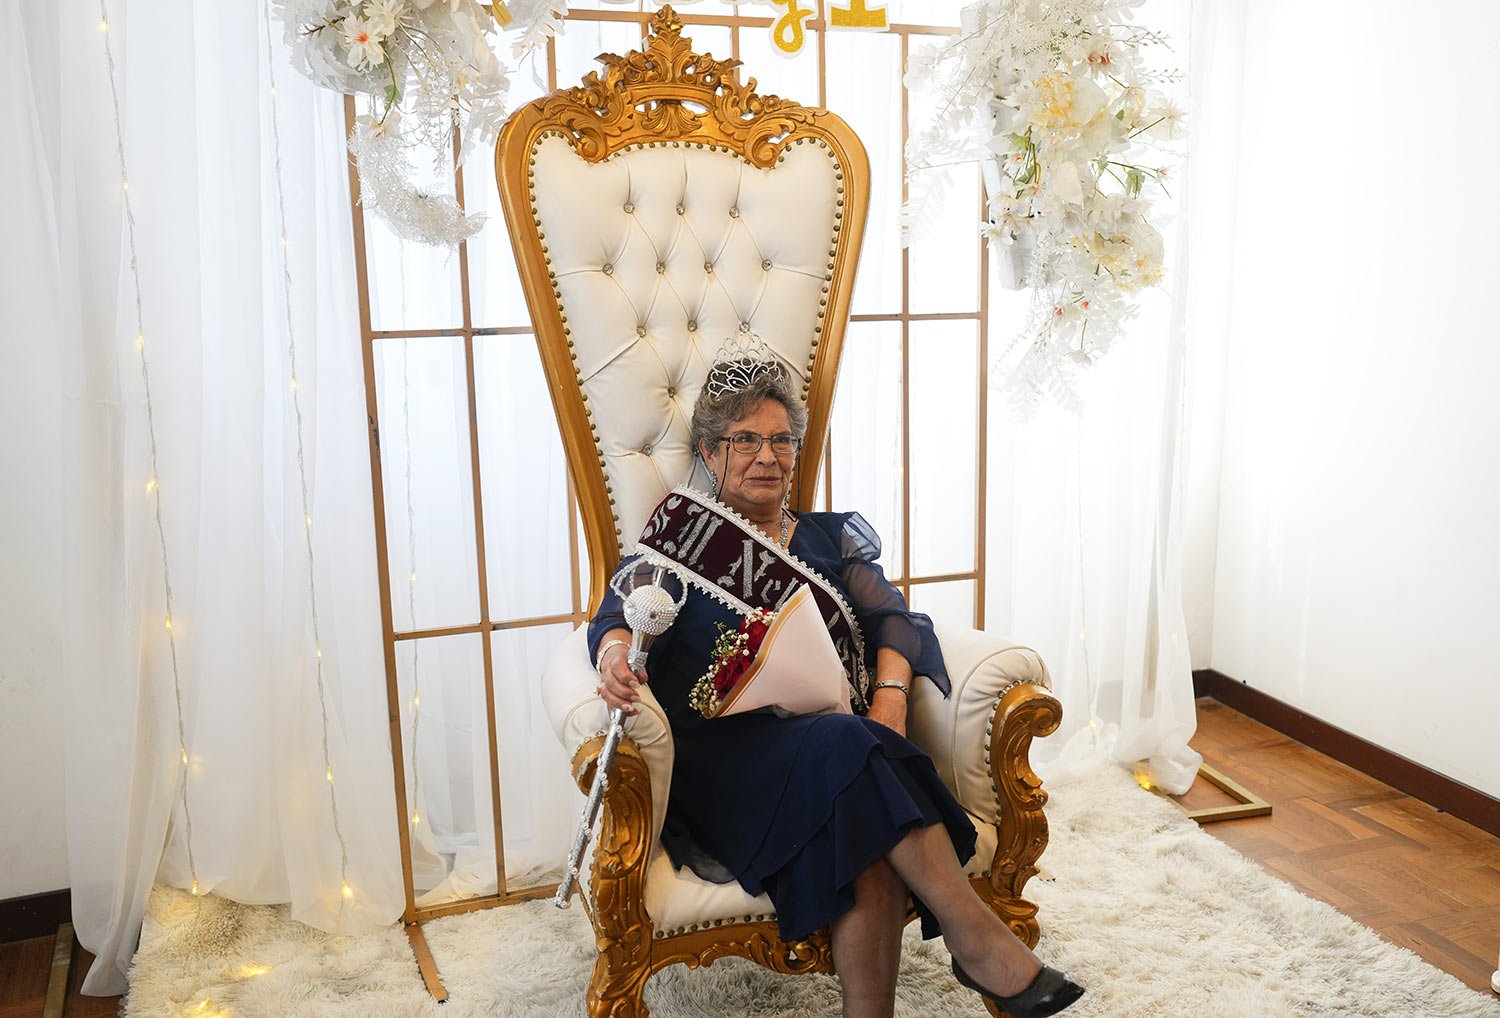  Nelly Meave poses for a photo after being crowned Elderly Spring Queen by the Association of Older Adult  in La Paz, Bolivia, Sept. 21, 2023. Members of the association, who meet weekly for events, said that Meave, who is known as Nelly the First, w